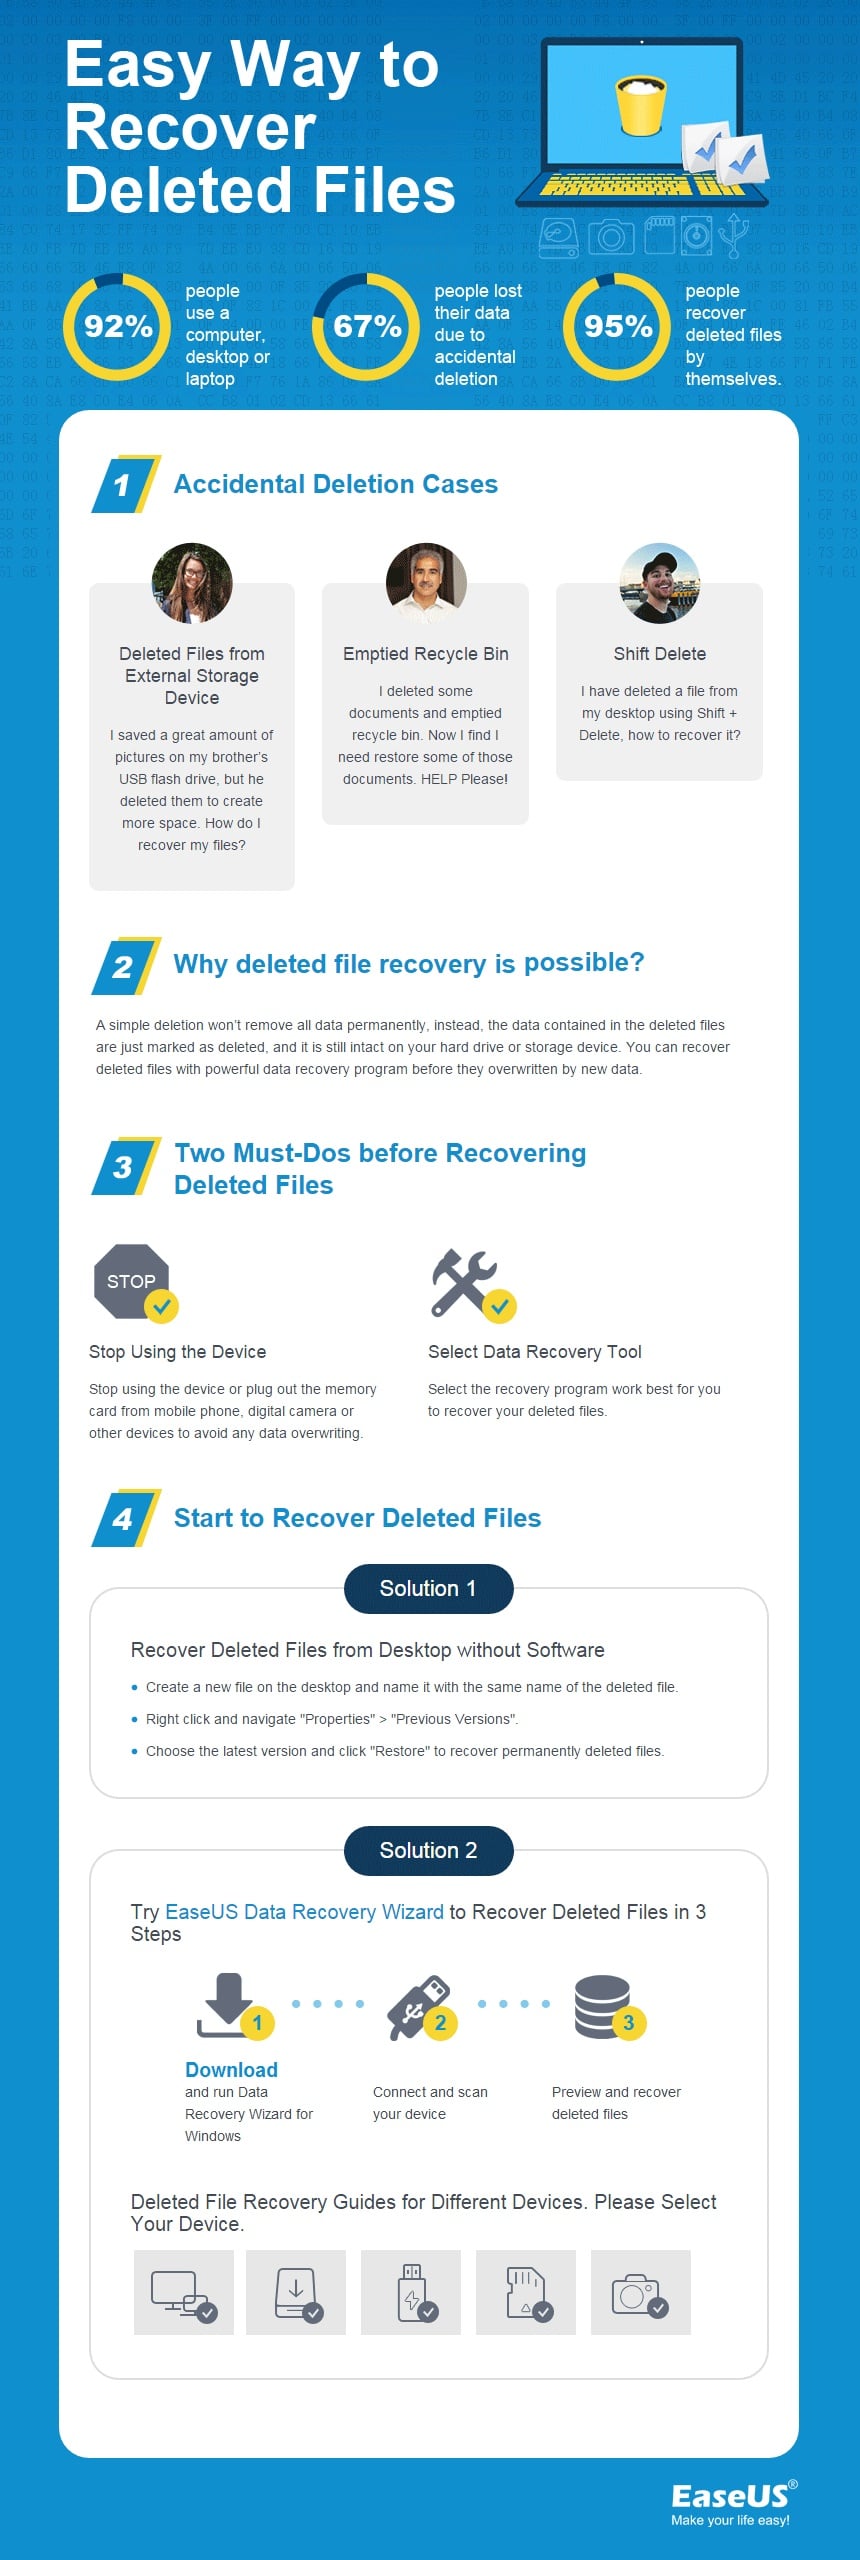 recover deleted files from hard drive and removable storage devices effortlessly